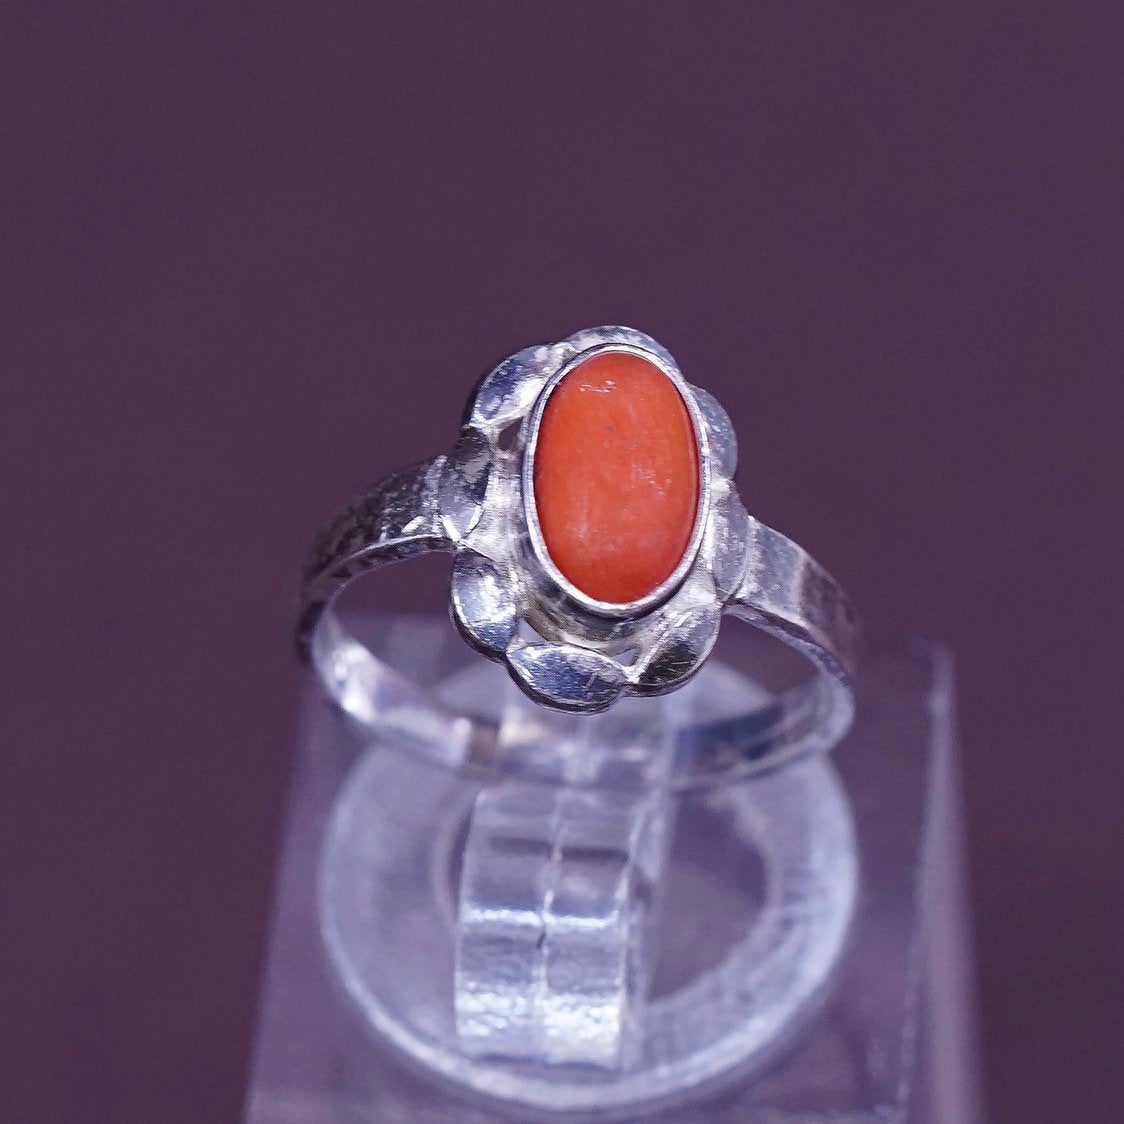 sz 3.75, Sterling silver ring w/ coral, Native American, southwestern 925 band